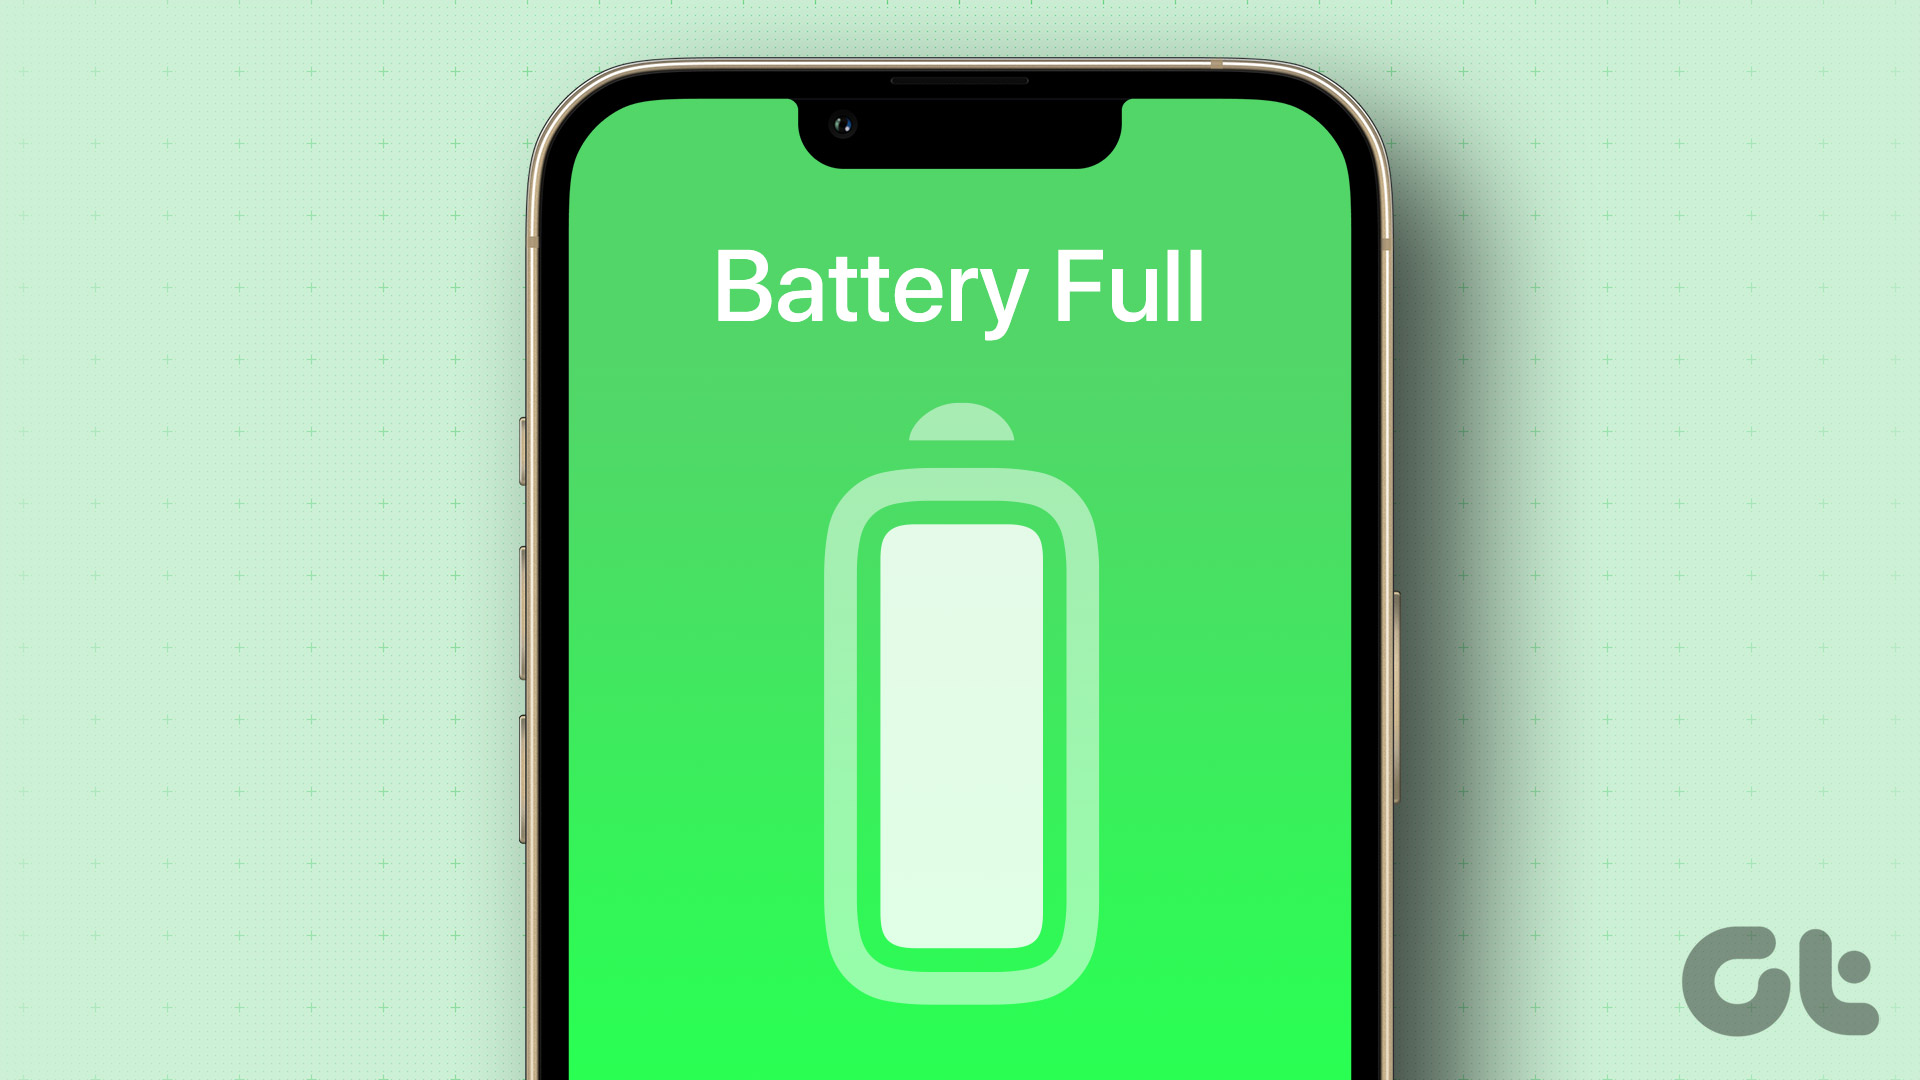 How to Get Battery Full Notification on iPhone